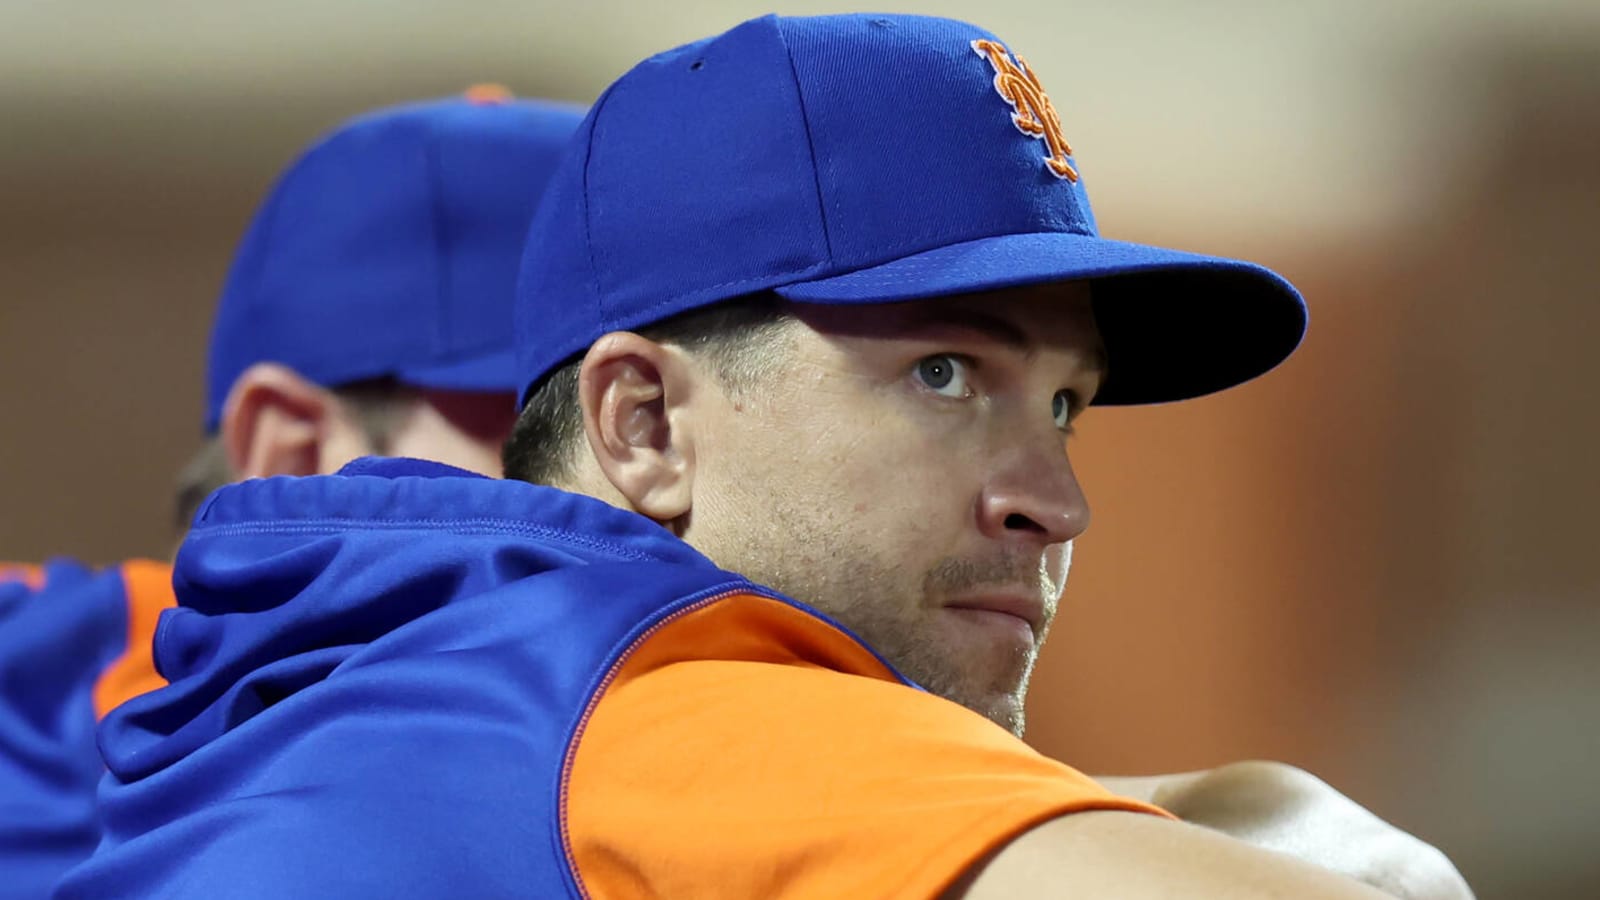 Report: Braves favorite to sign Jacob deGrom if he opts out of deal